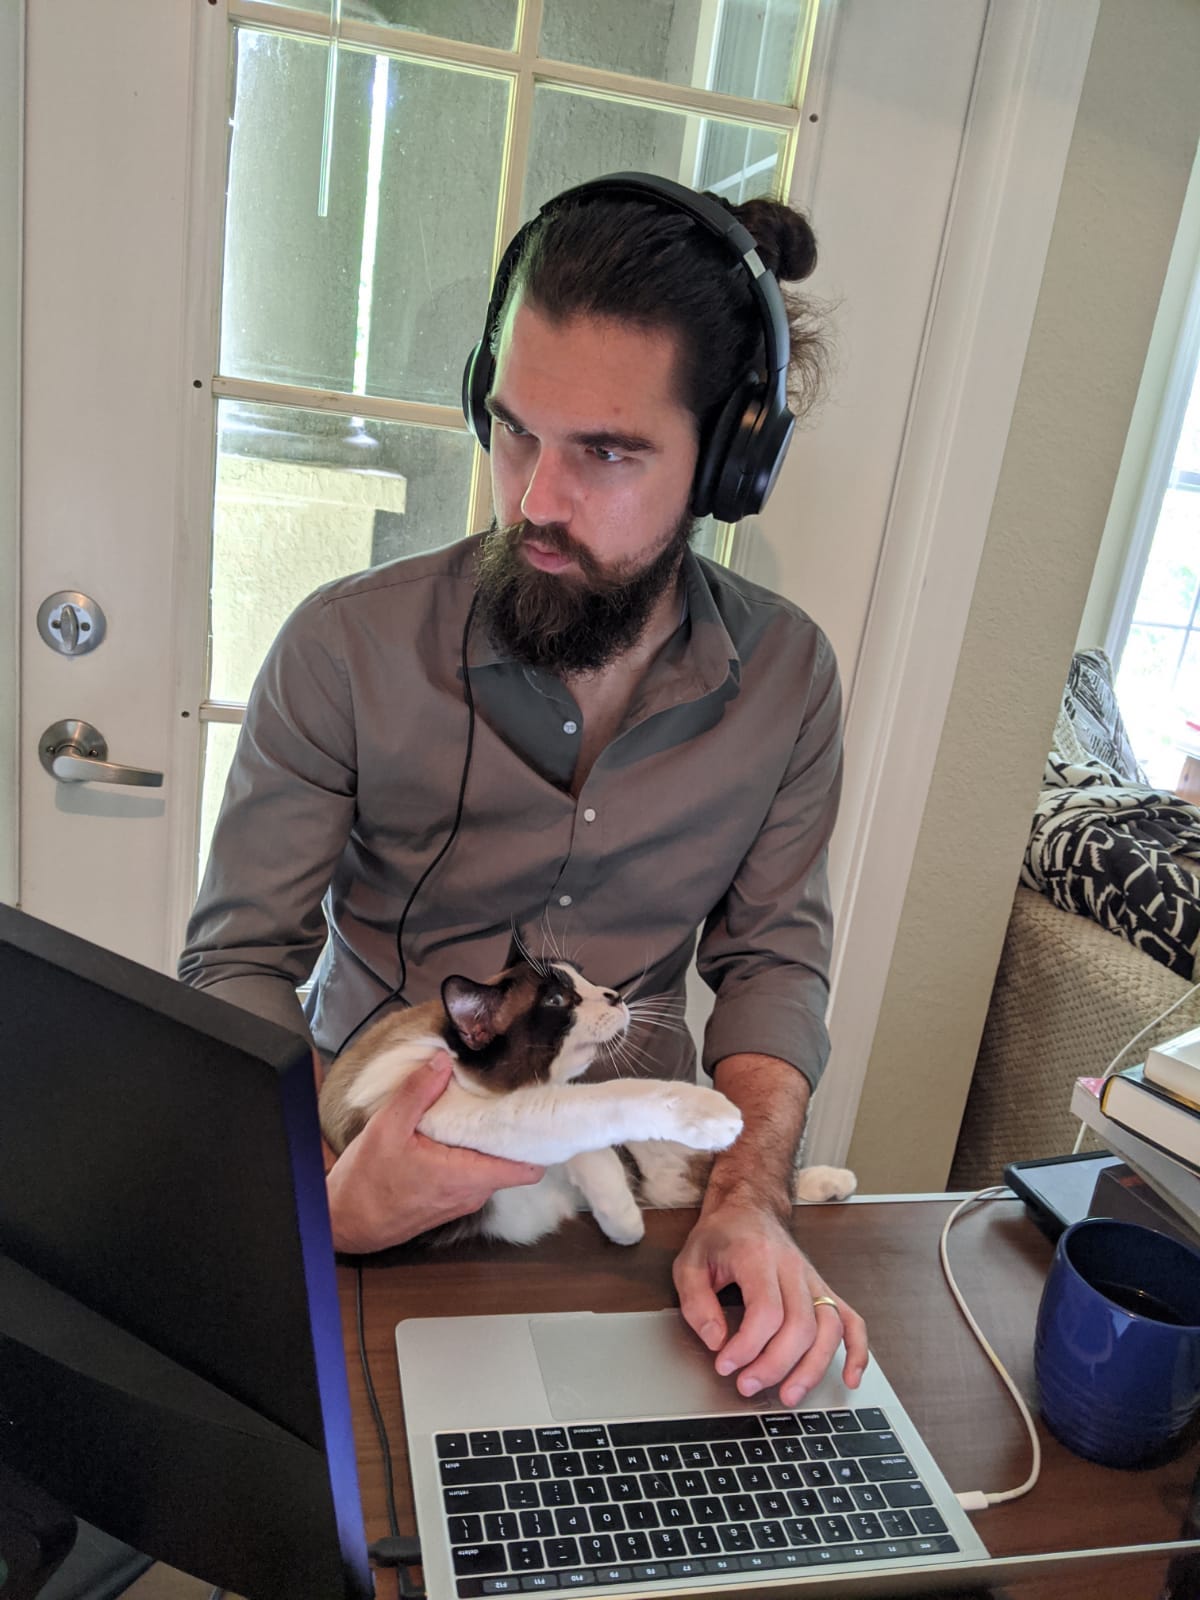 Picture of Sam Holley-Kline sitting at his laptop with headphones and his cat on his lap.